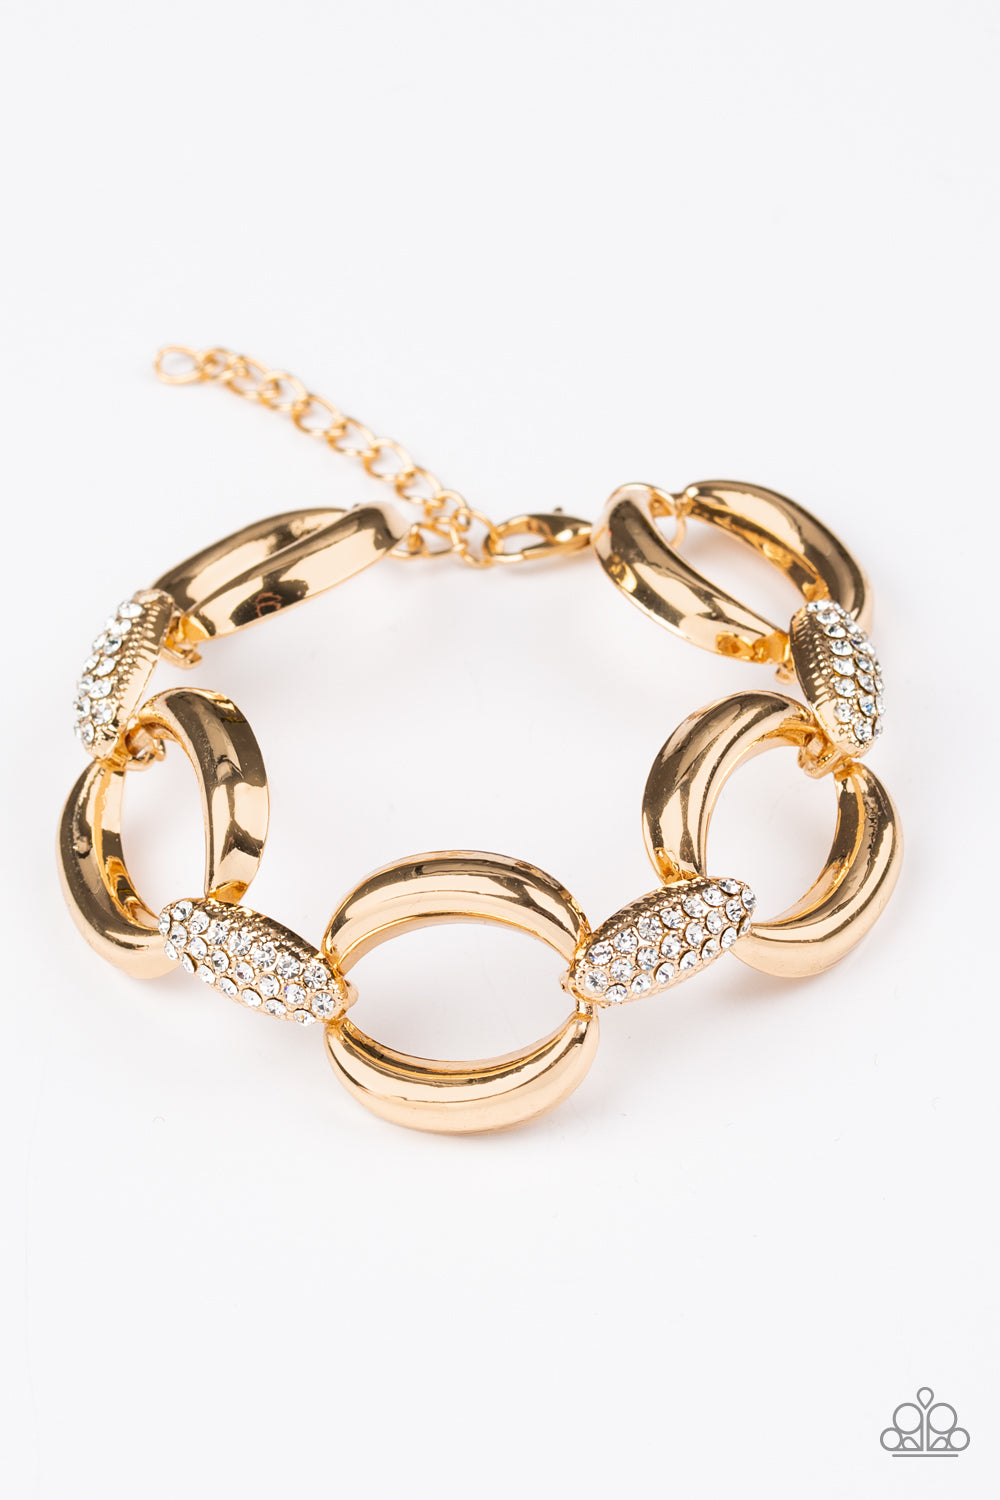 Don't Forget Who's Boss! Gold-Bracelet